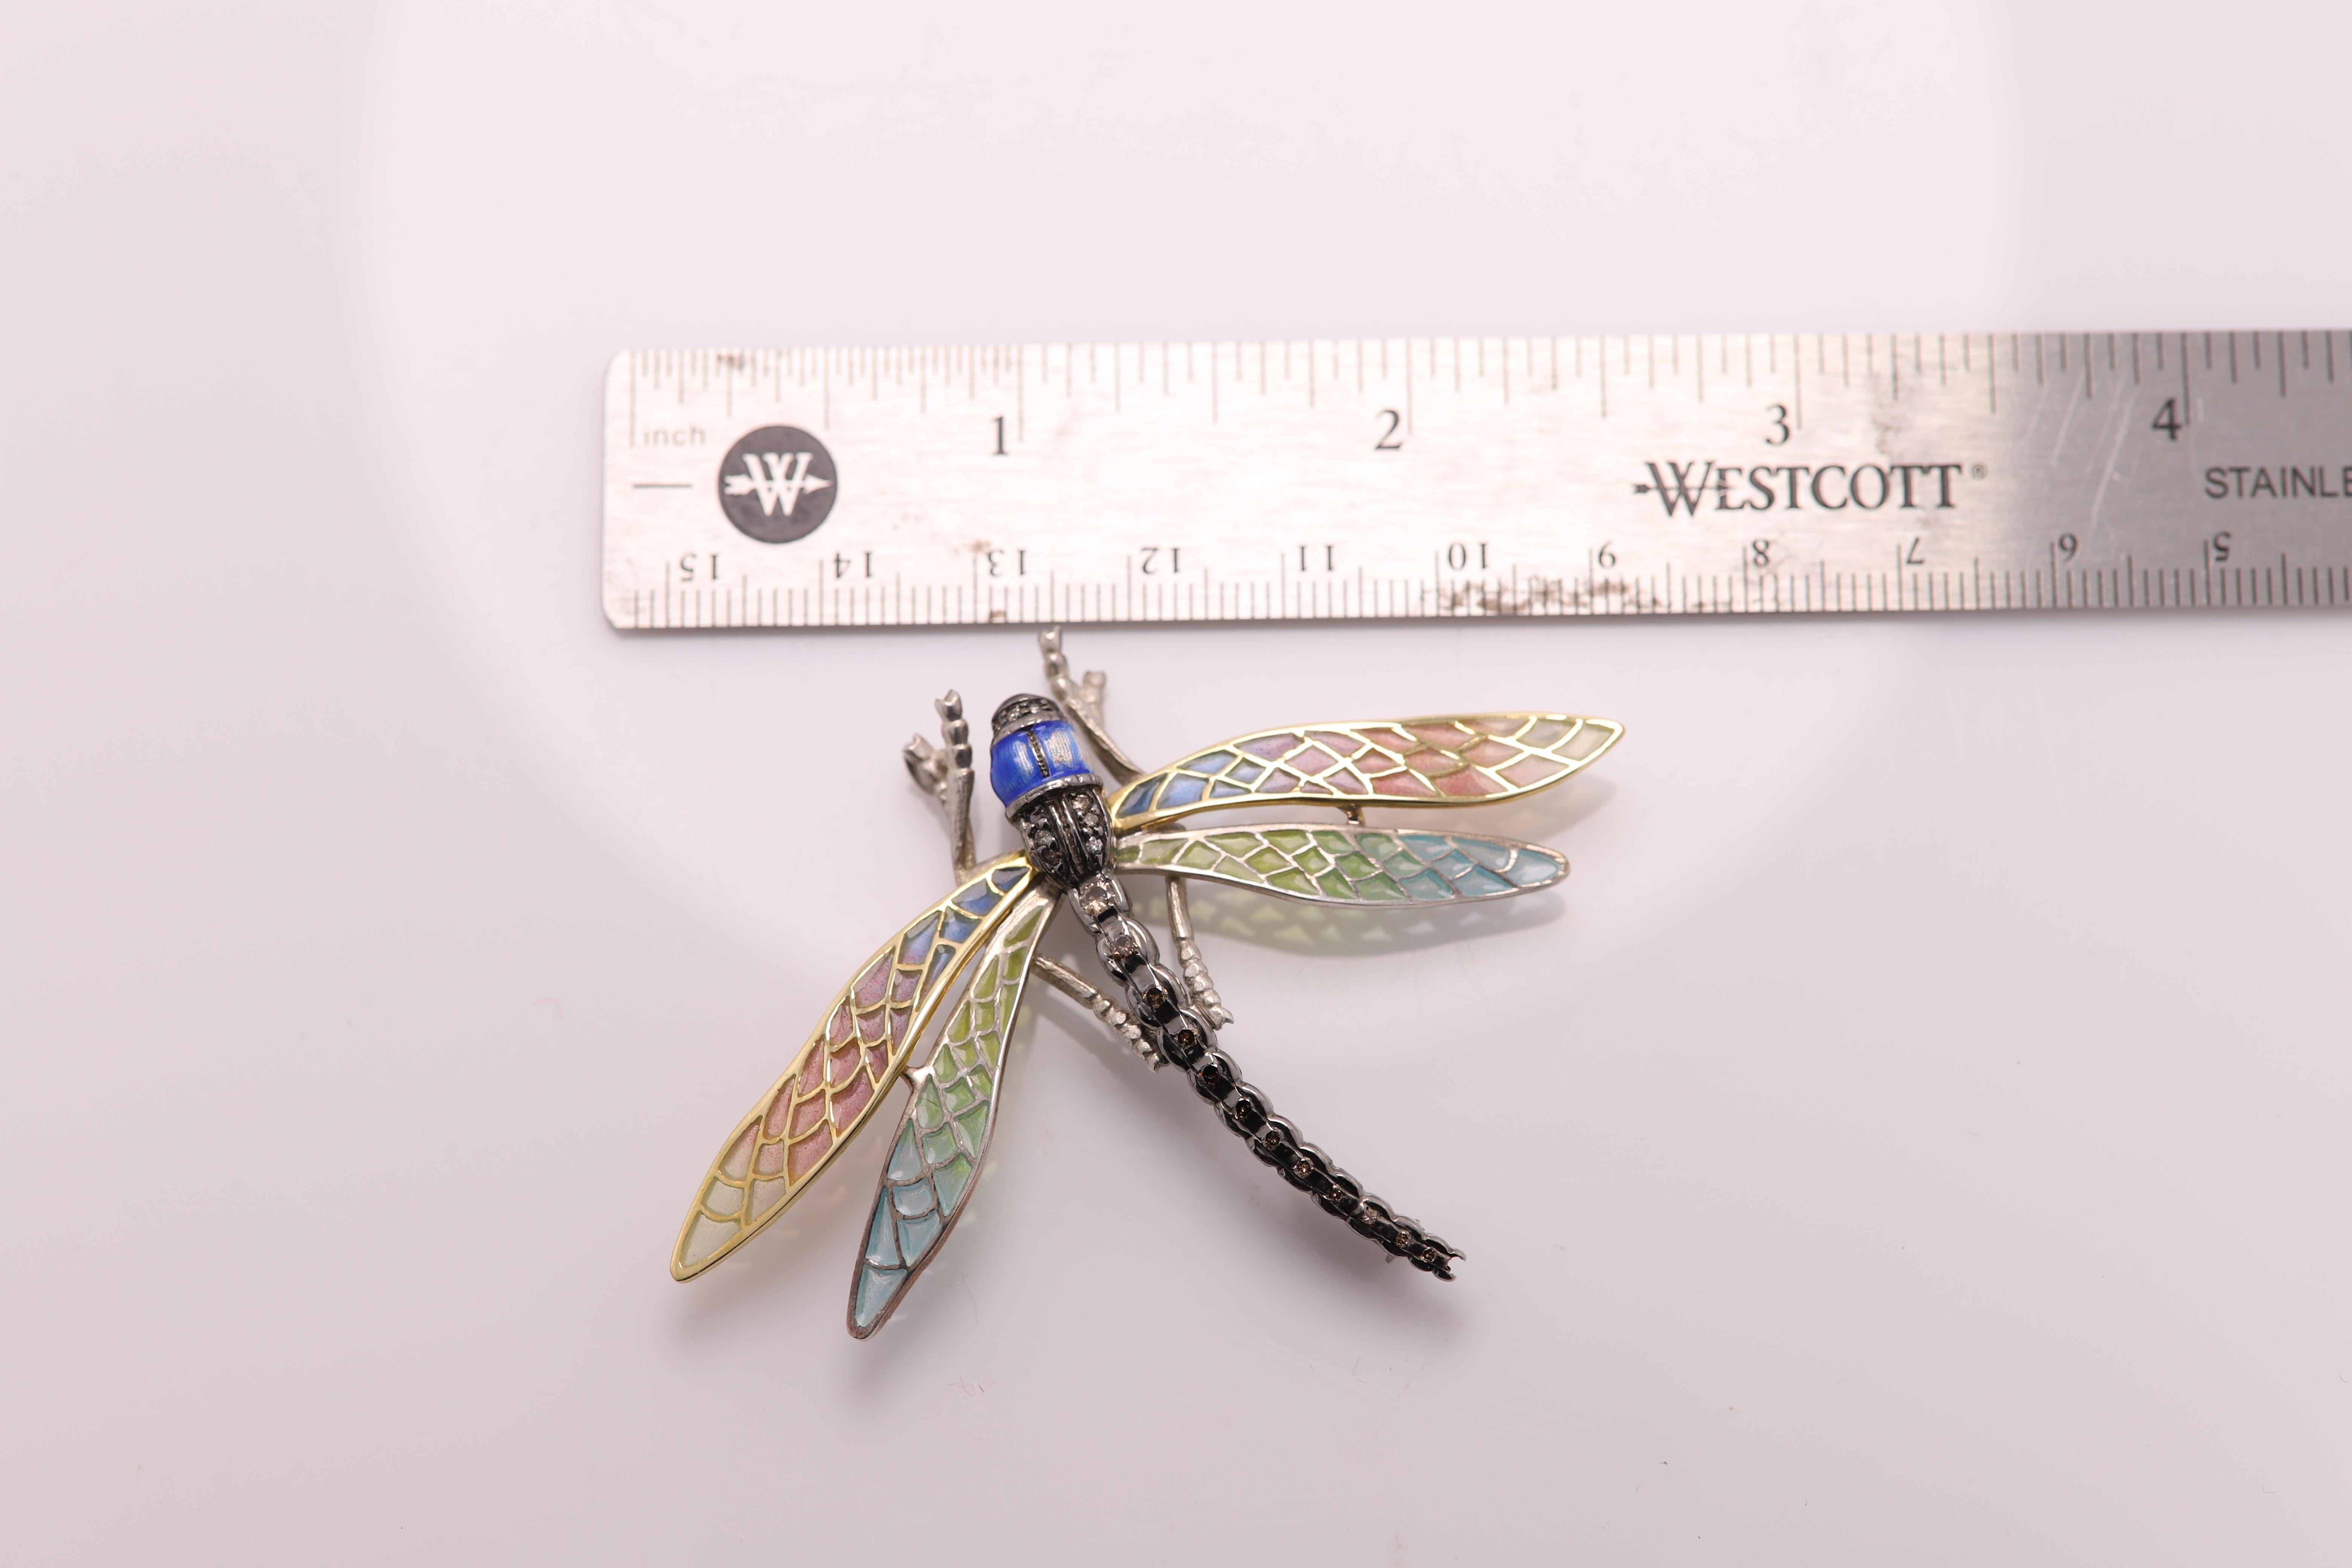 VINTAGE DRAGONFLY BROOCH PIN / NECKLACE
Hand made in Spain with brilliant colors of Enamel
Sterling Silver 925 (oxidized) and plus 18K Yellow Gold
Total weight 11 grams
Brown Diamonds all along the tail
Dimension: 2.75' inch wide. and about 2' inch